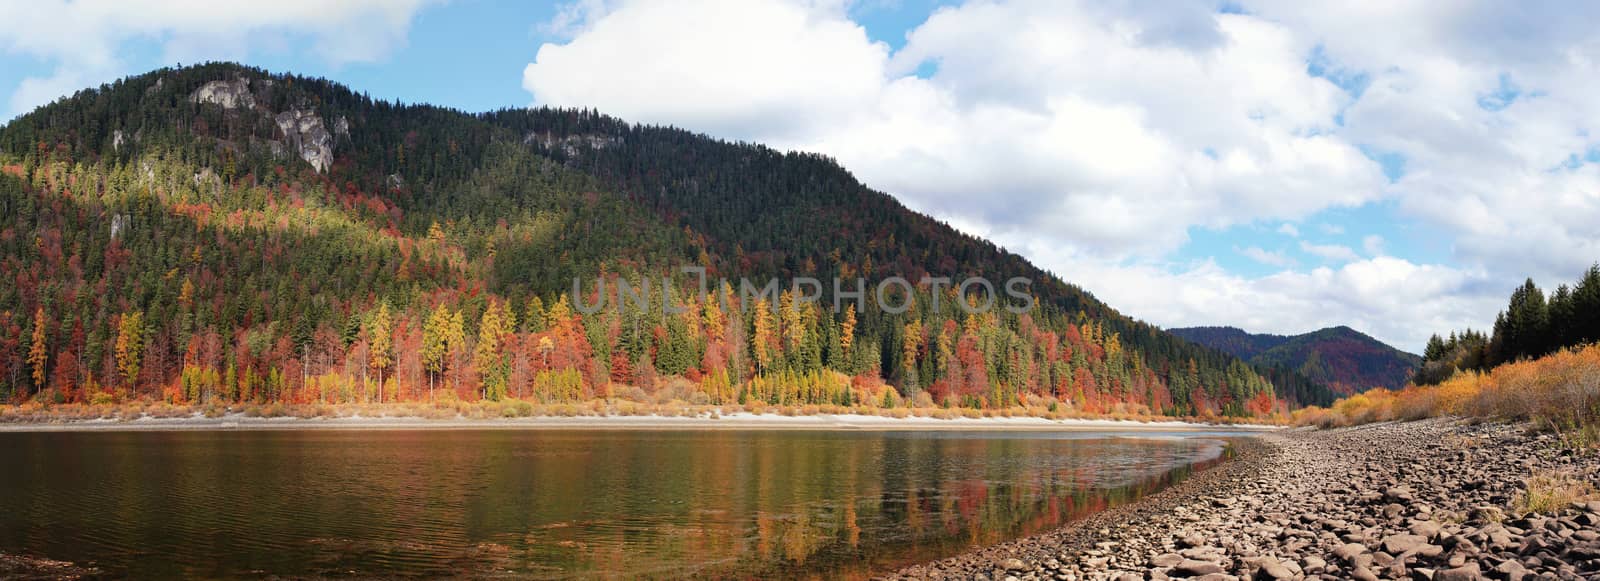 Calm lake with low water - round stones at shore visible, autumn coloured coniferous trees on other side, blue sky above by Ivanko